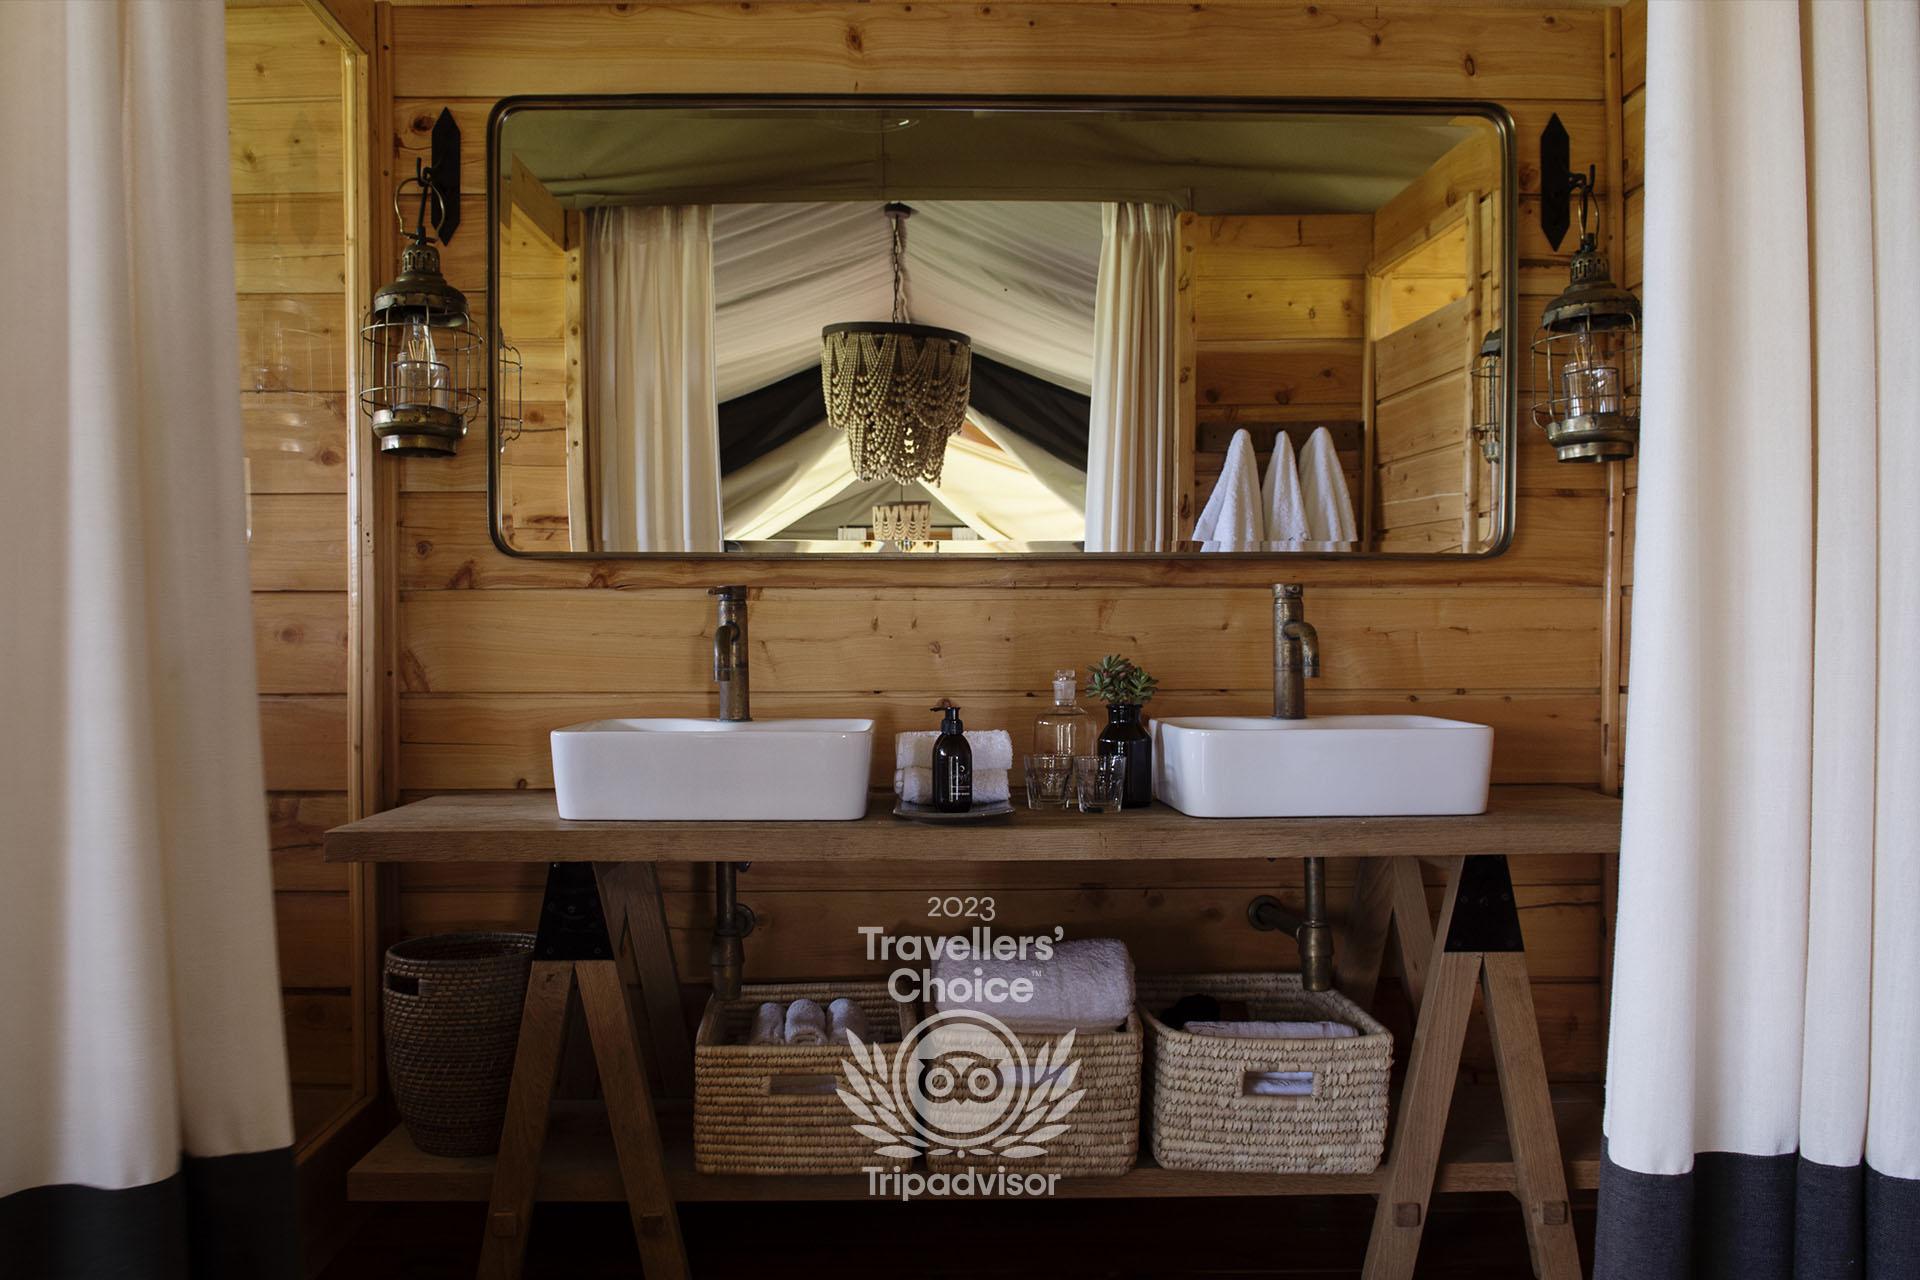 An ensuite bathroom with “his and hers” wash hand basins, large shower and proper flush toilet complete each guest tent